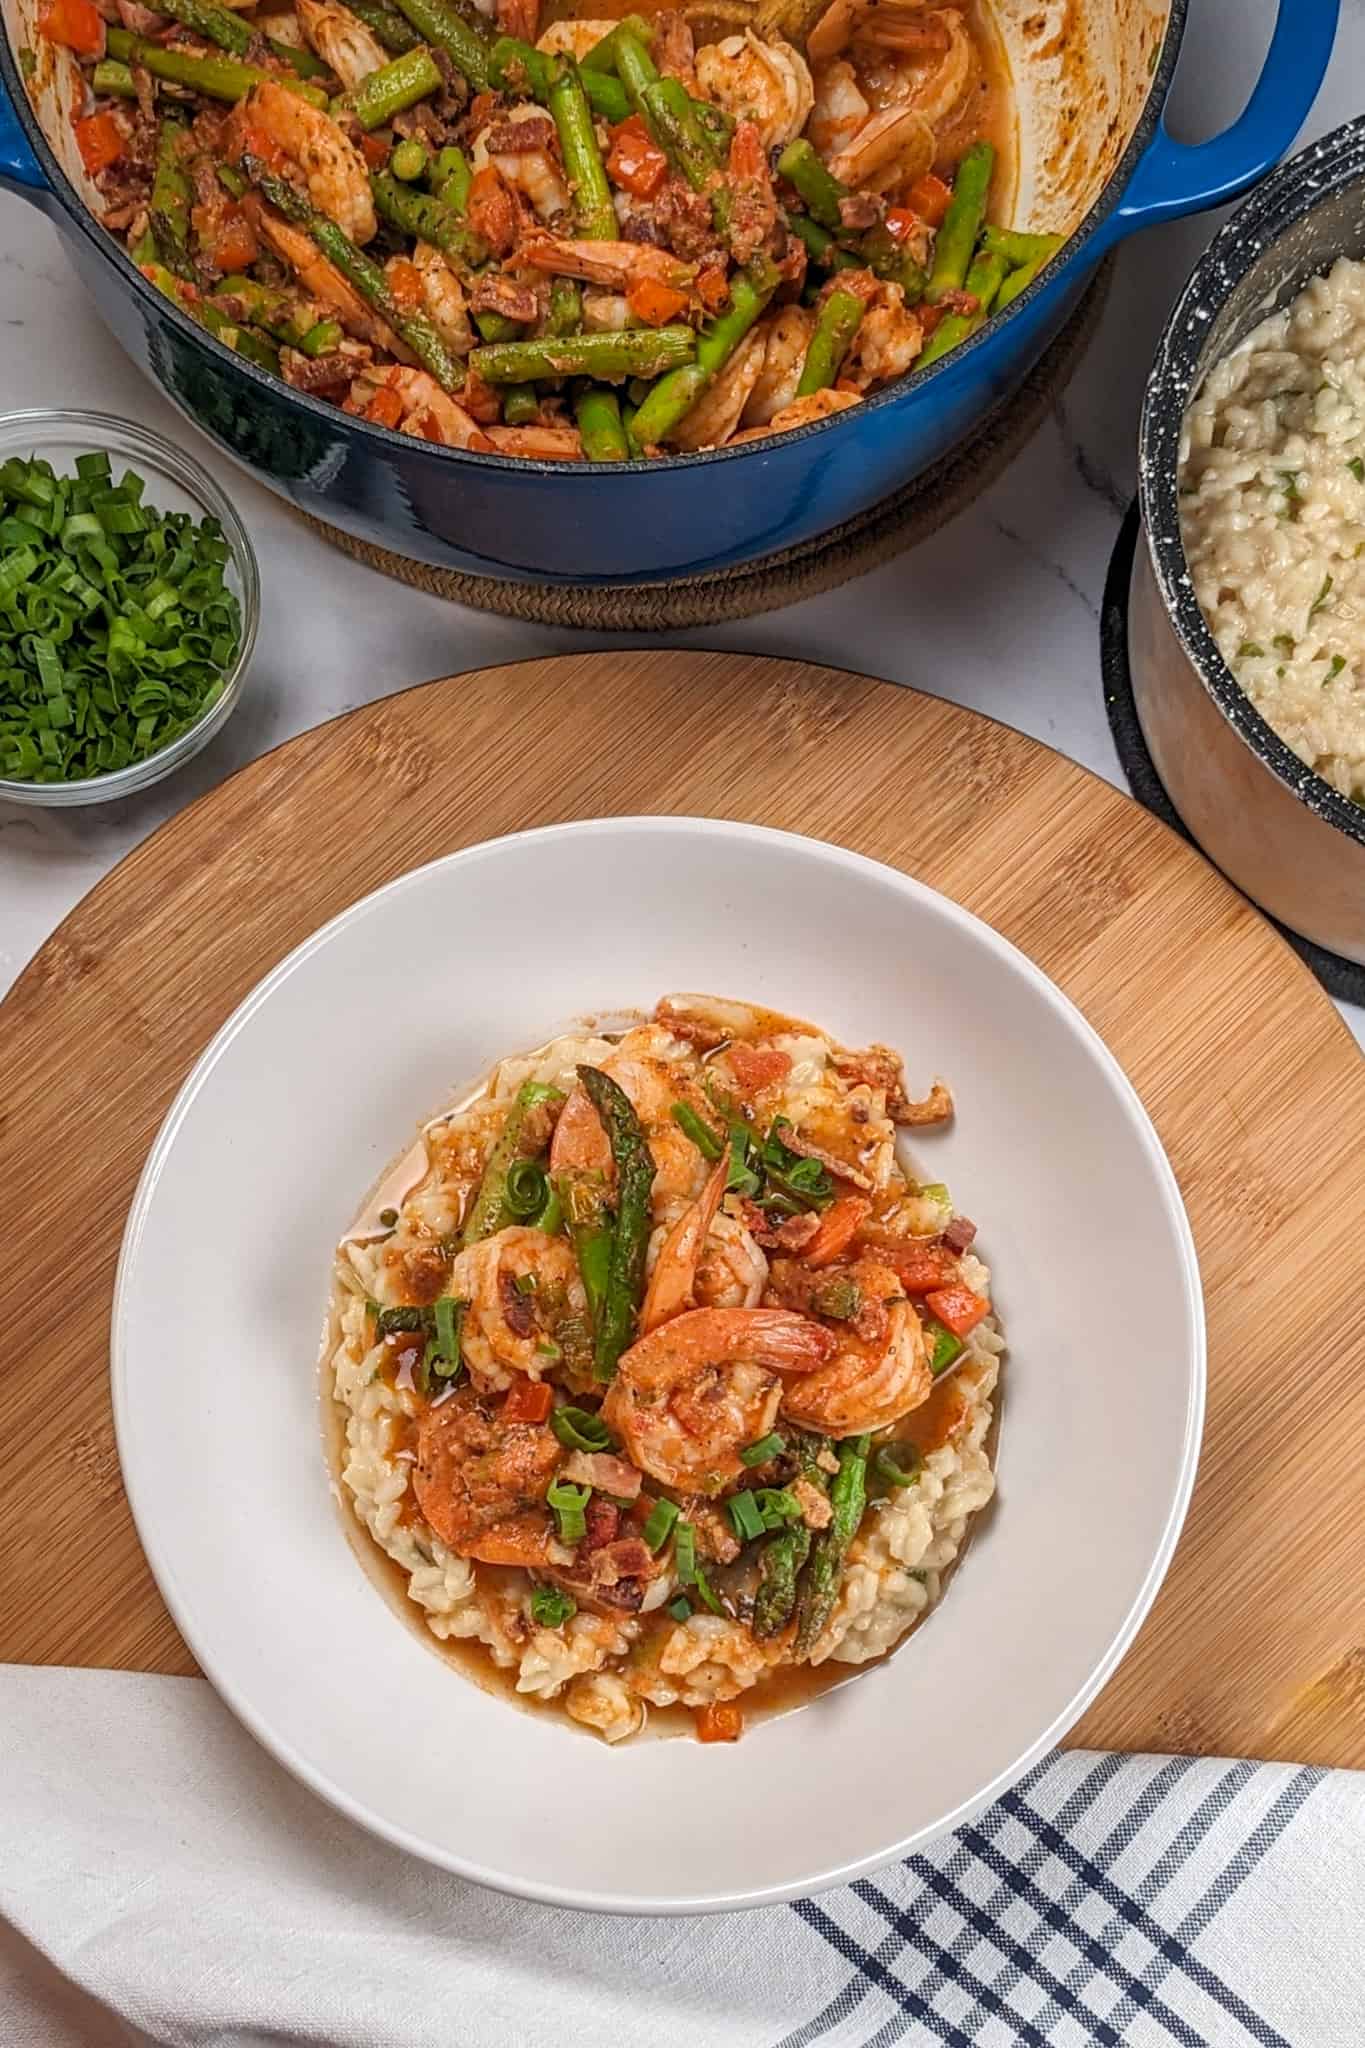 Top view of the Spicy Creole Shrimp and White Cheddar Cheese Risotto in a wide rim bowl on a wooden lazy susan next to a kitchen towel, surrounded by a small glass bowl of sliced scallions, a dutch oven of shrimp and asparagus and a canister of cooked risotto.